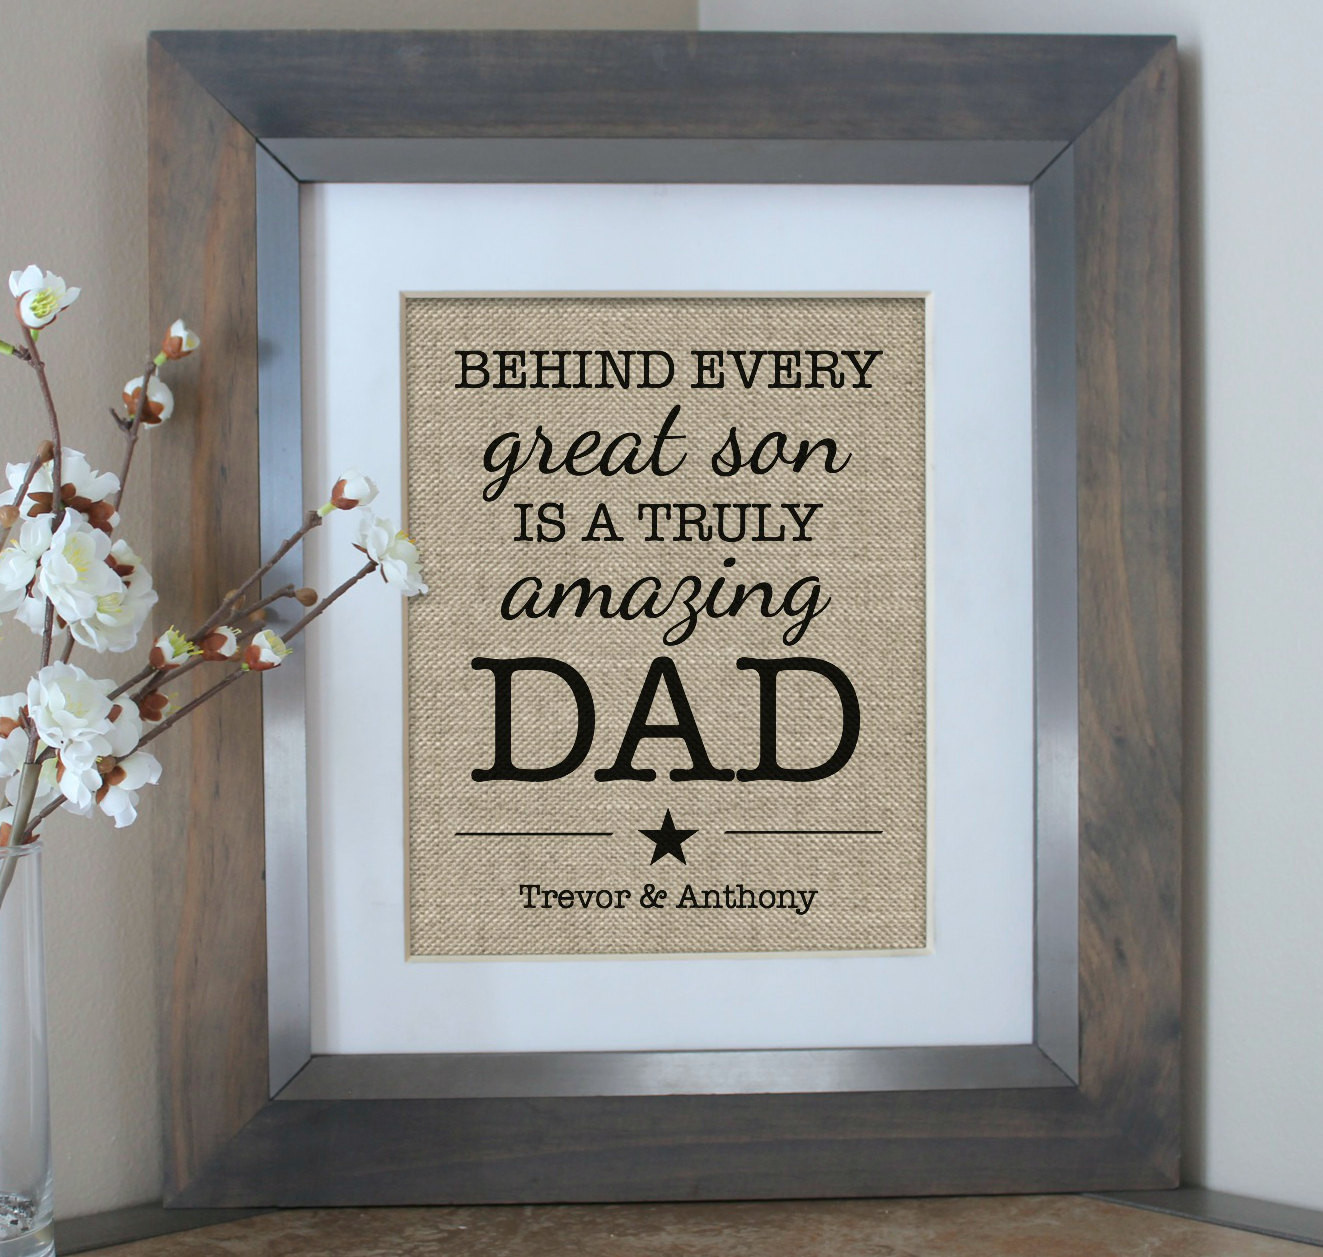 20 Best Fathers Day Gift From sons - Home, Family, Style ...